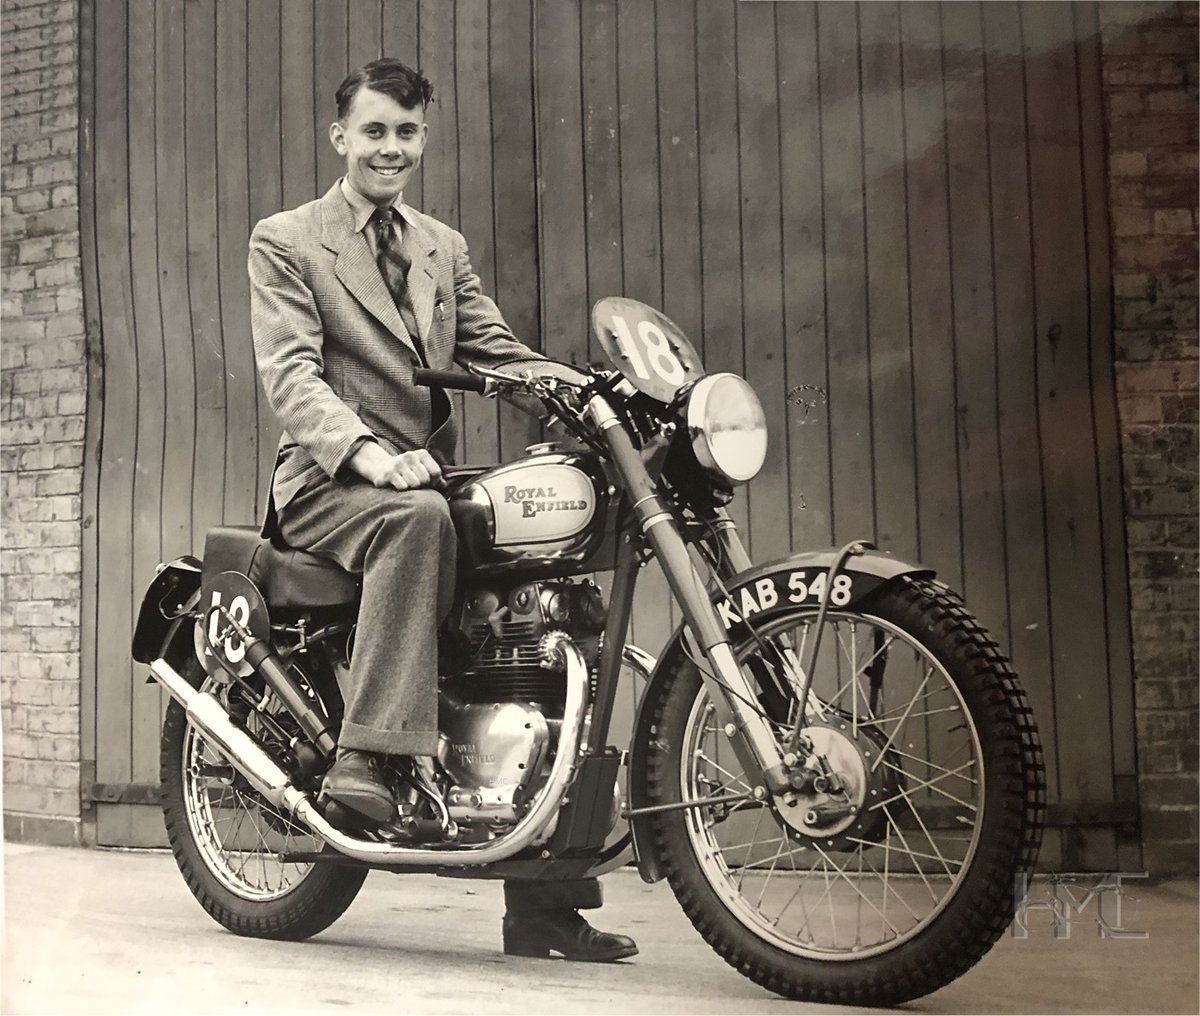 Johnny Brittain looking very dapper aboard a #Redditch factory works bike. #royalenfield #endurobike #royalenfieldbullet #trailsbike #bullet #riding #trials #ISDT #enduro #twin #meteor #offroad #dapper #1950s #motorcycle #classicmotorcycle #supermeteor #interceptor #offroad #bike